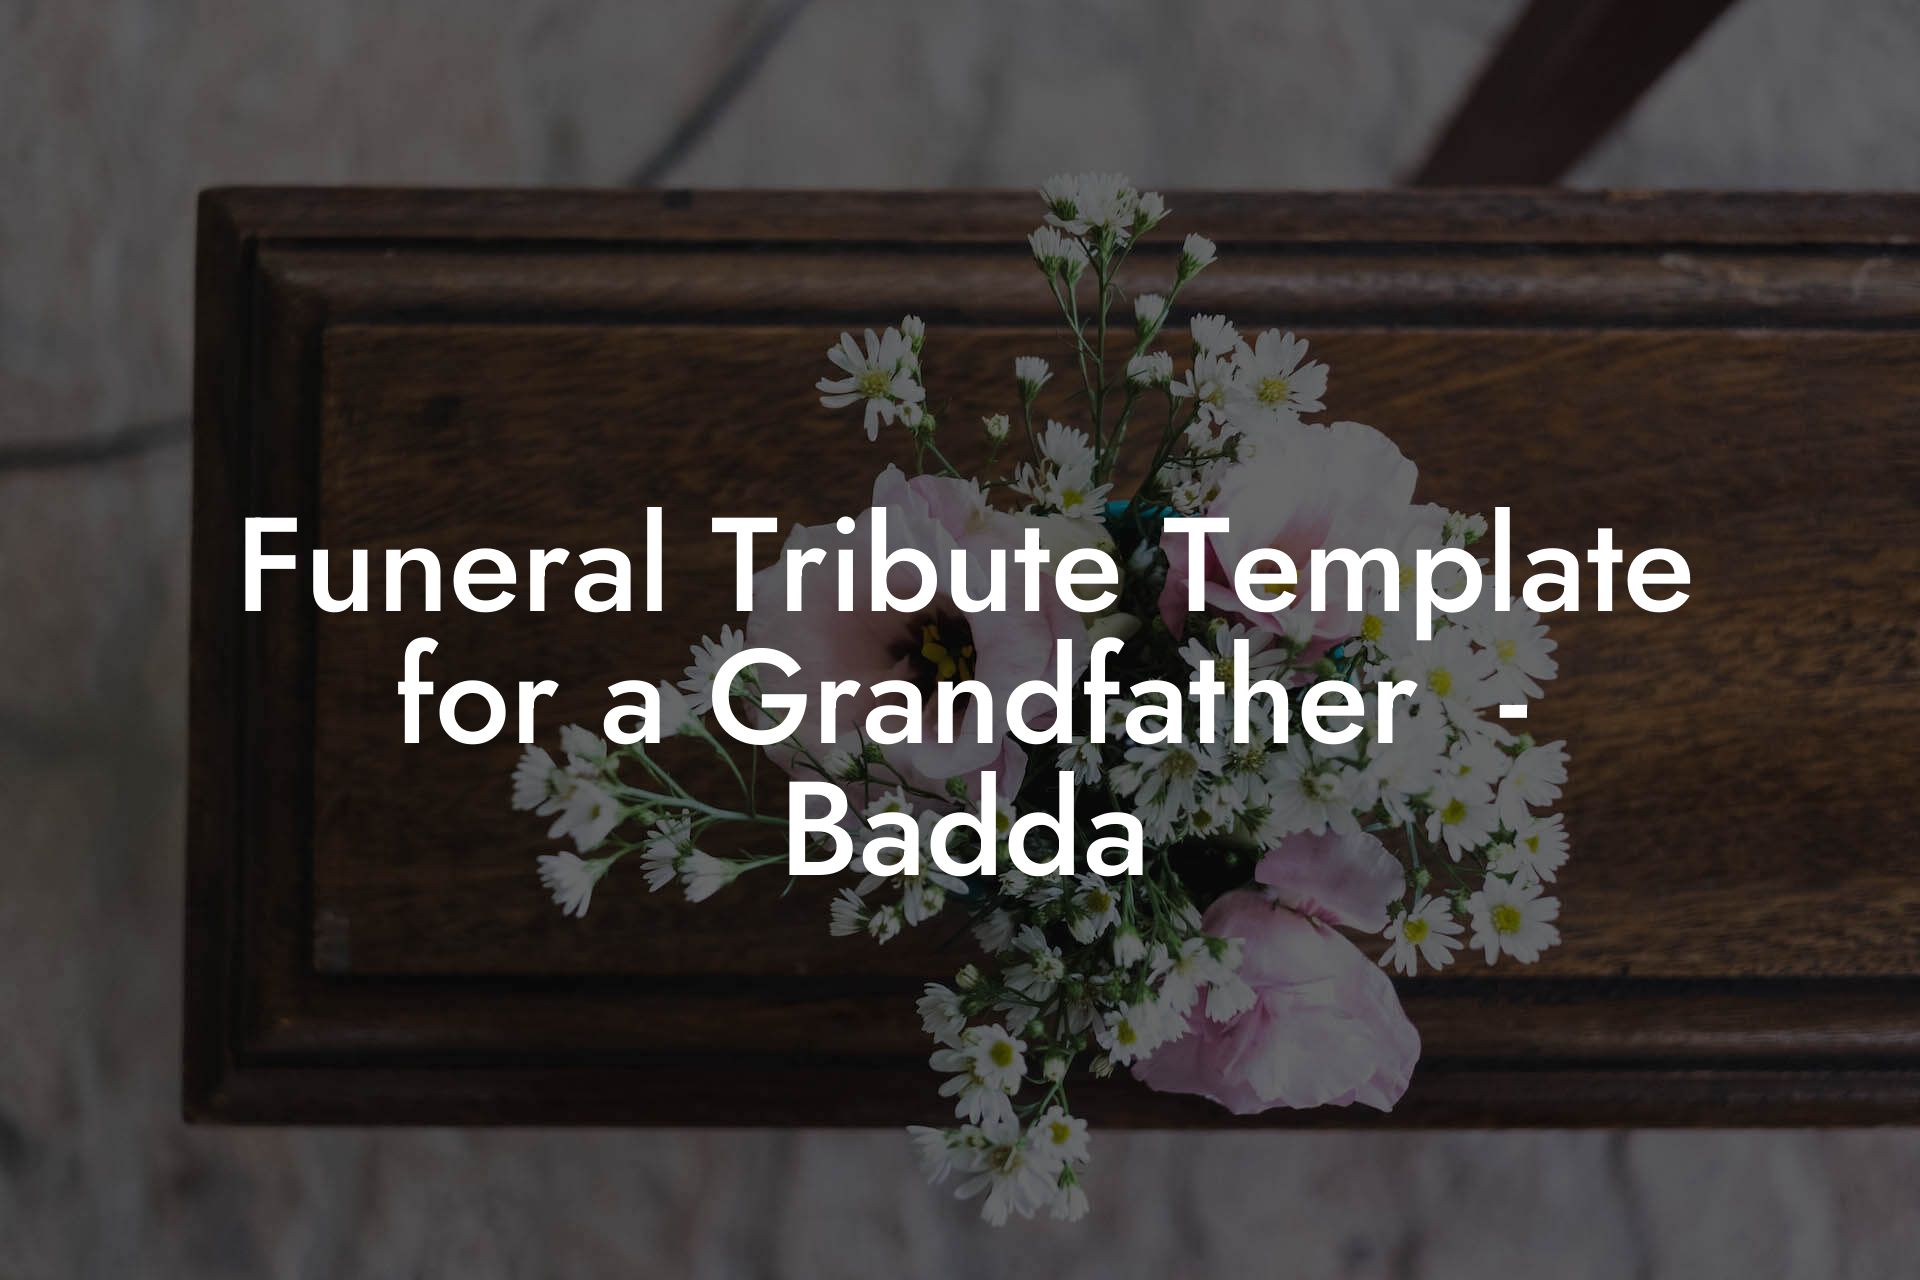 Funeral Tribute Template for a Grandfather  - Badda